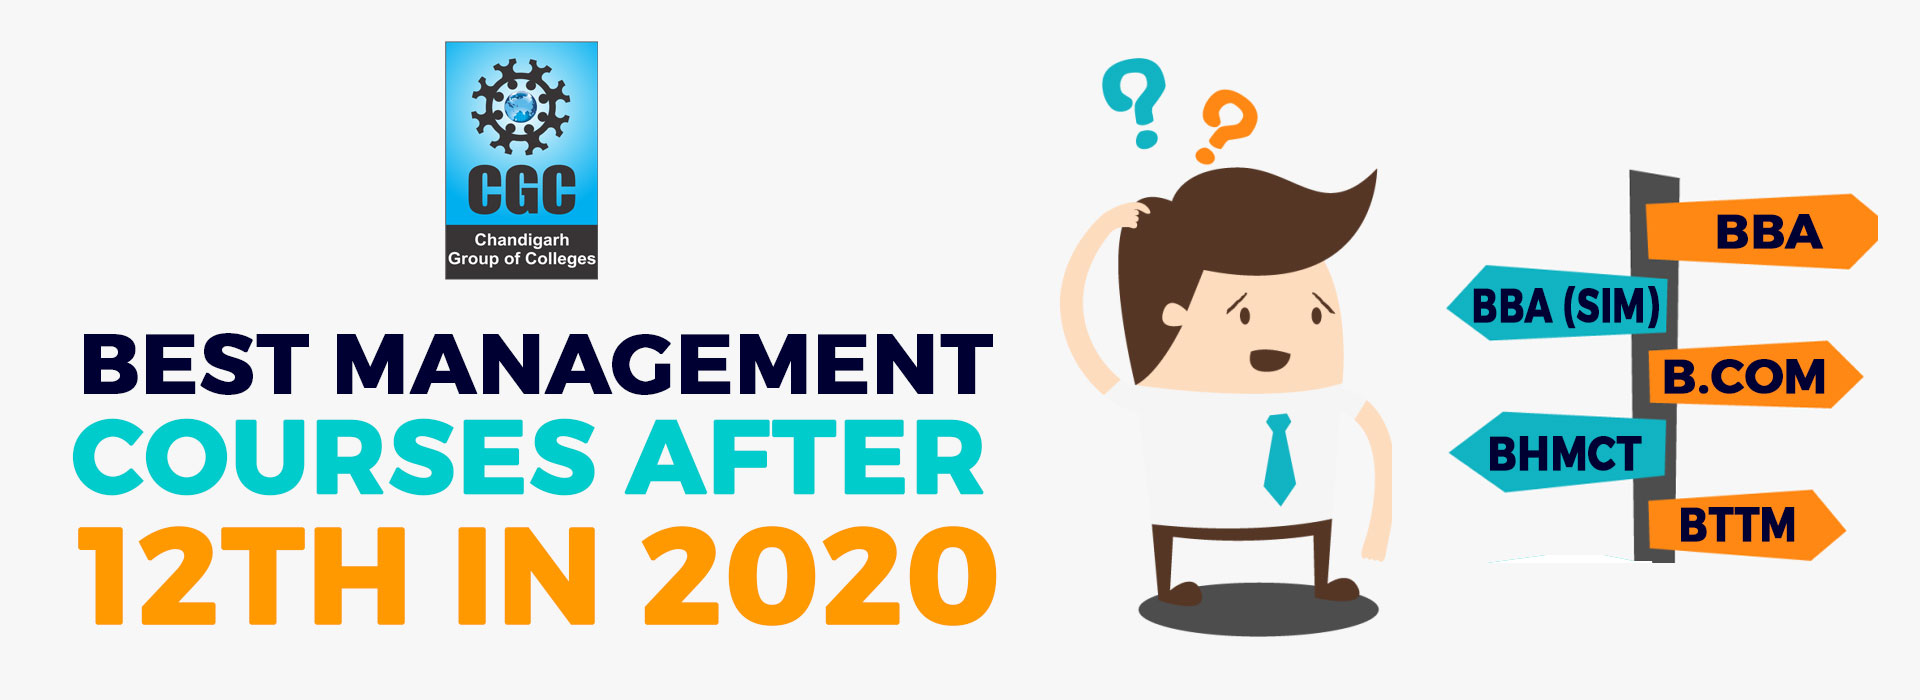 Best Management Courses After 12th in 2020 